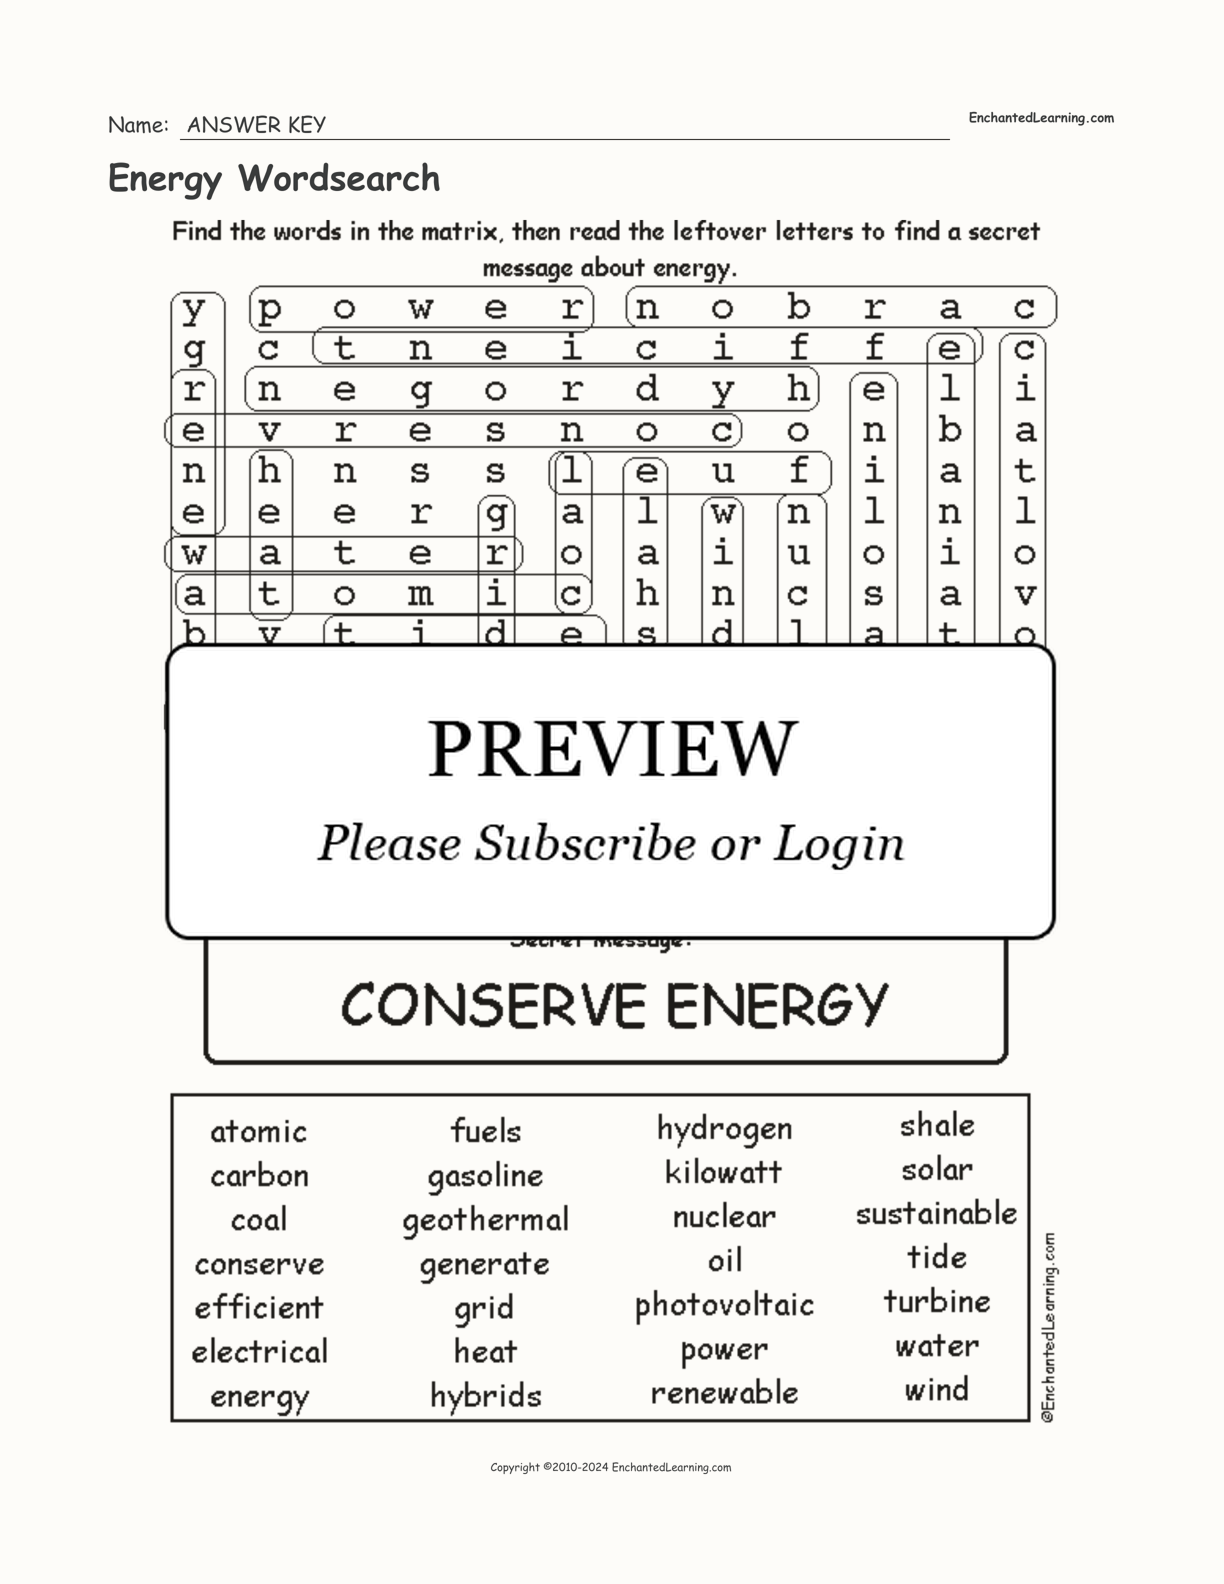 Energy Wordsearch interactive worksheet page 2